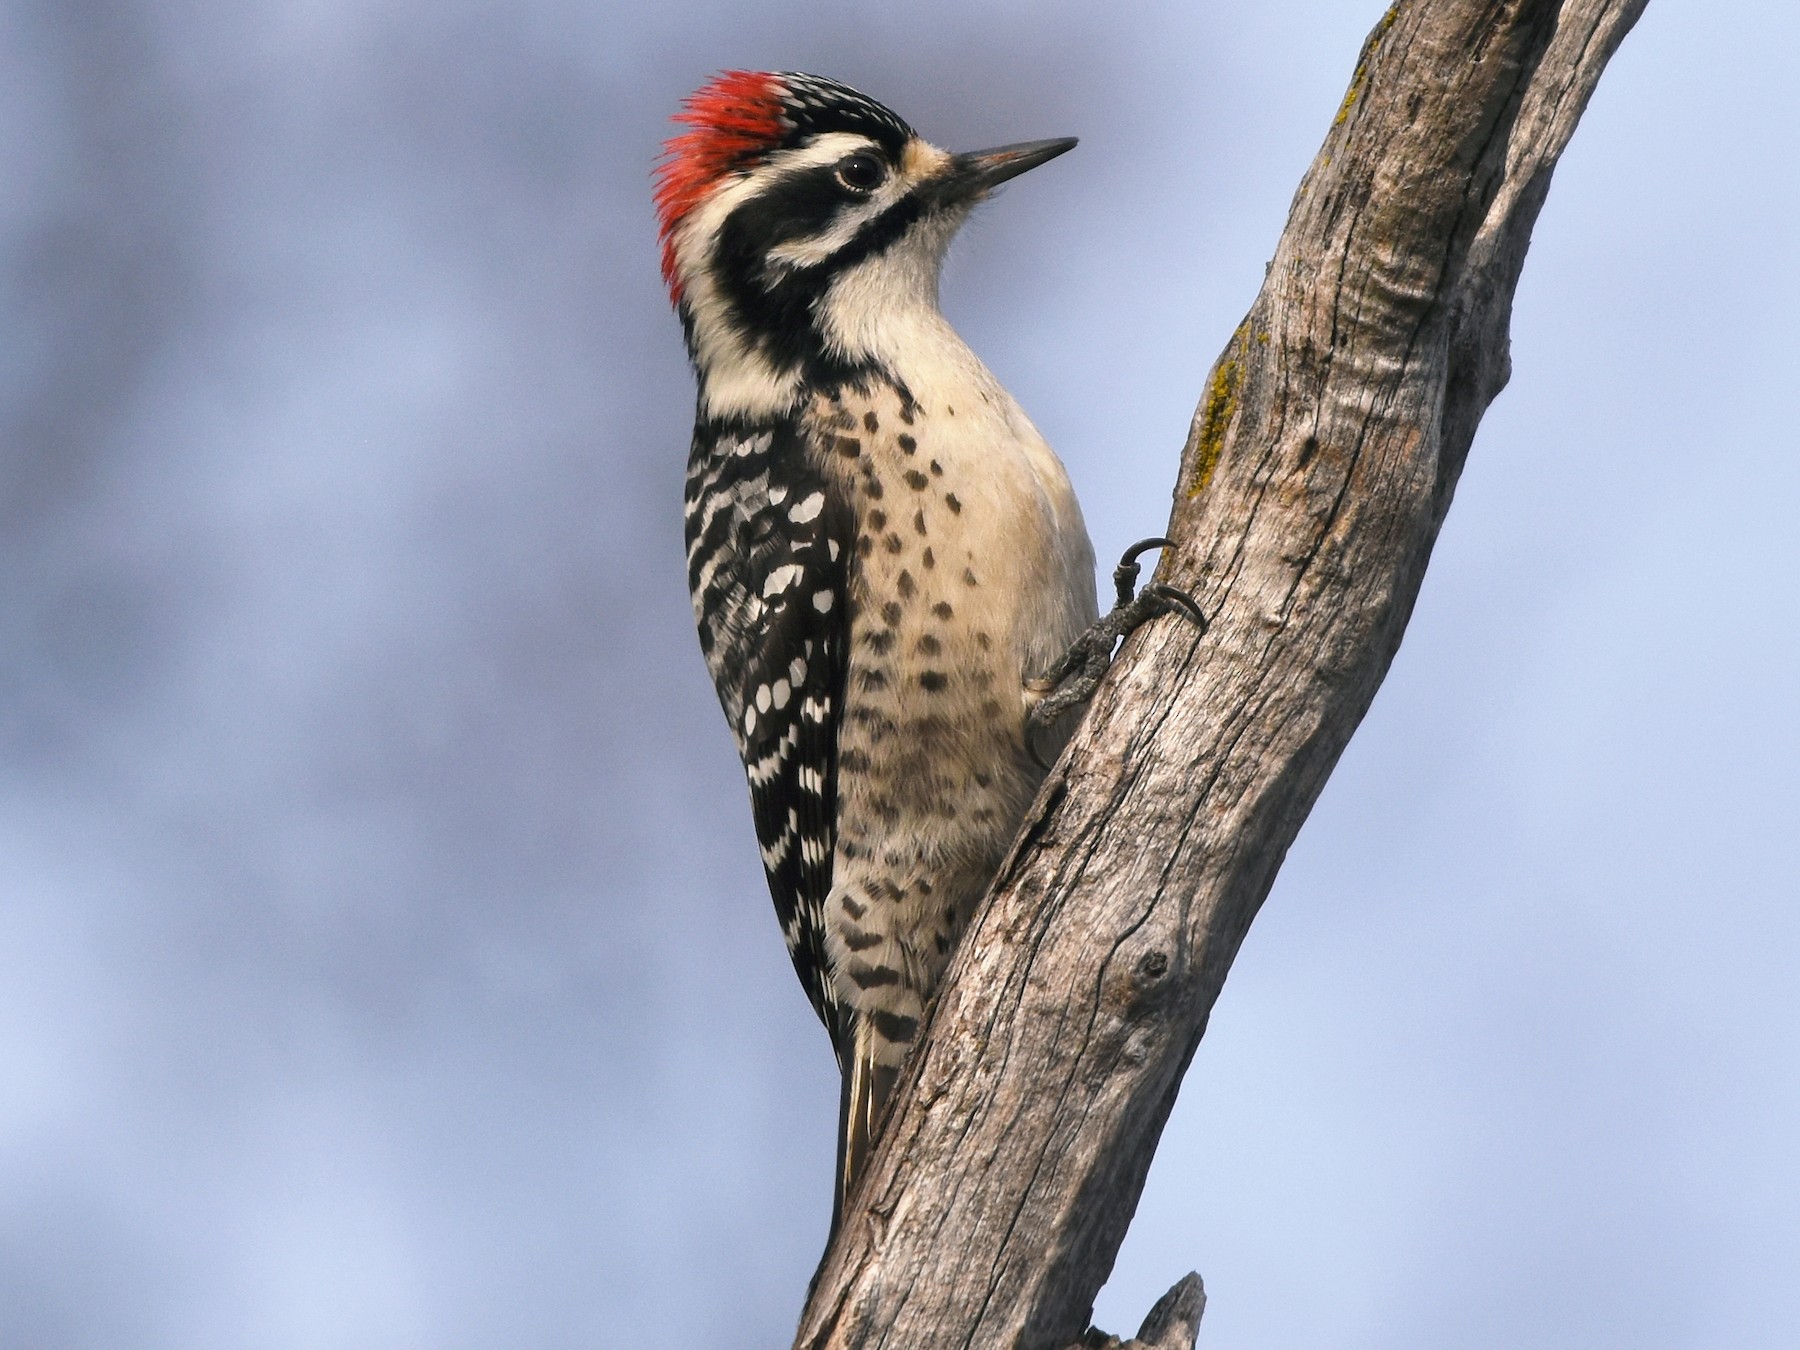 A Nuttall's Woodpecker perched on a tree branch